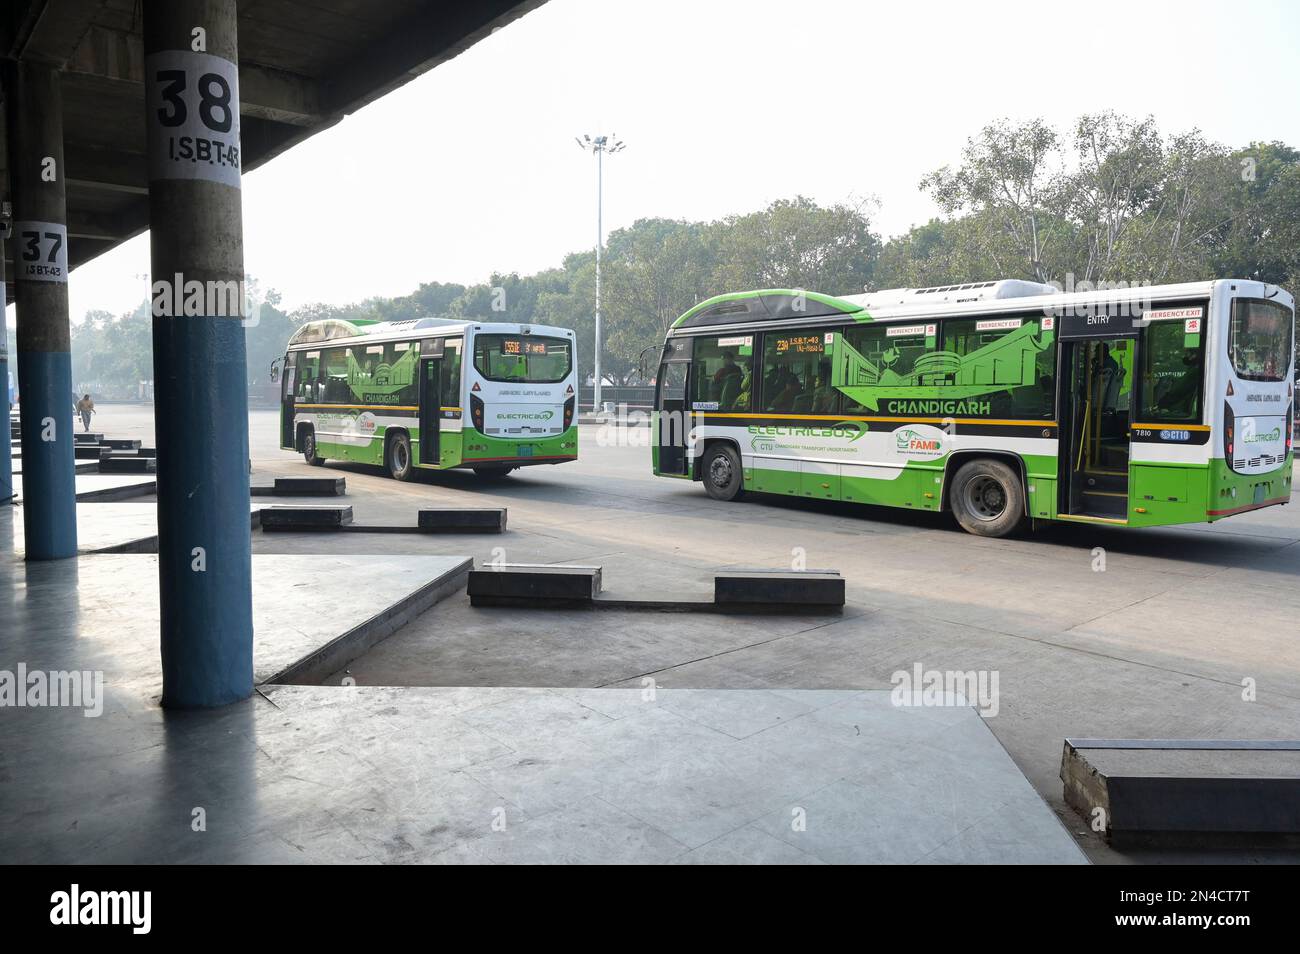 INDIA, Chandigarh, Sector 17, Inter State bus terminal, Ashok Leyland electric bus for public transport in the city, town planning in sectors designed by Le Corbusier in the 1950' Stock Photo